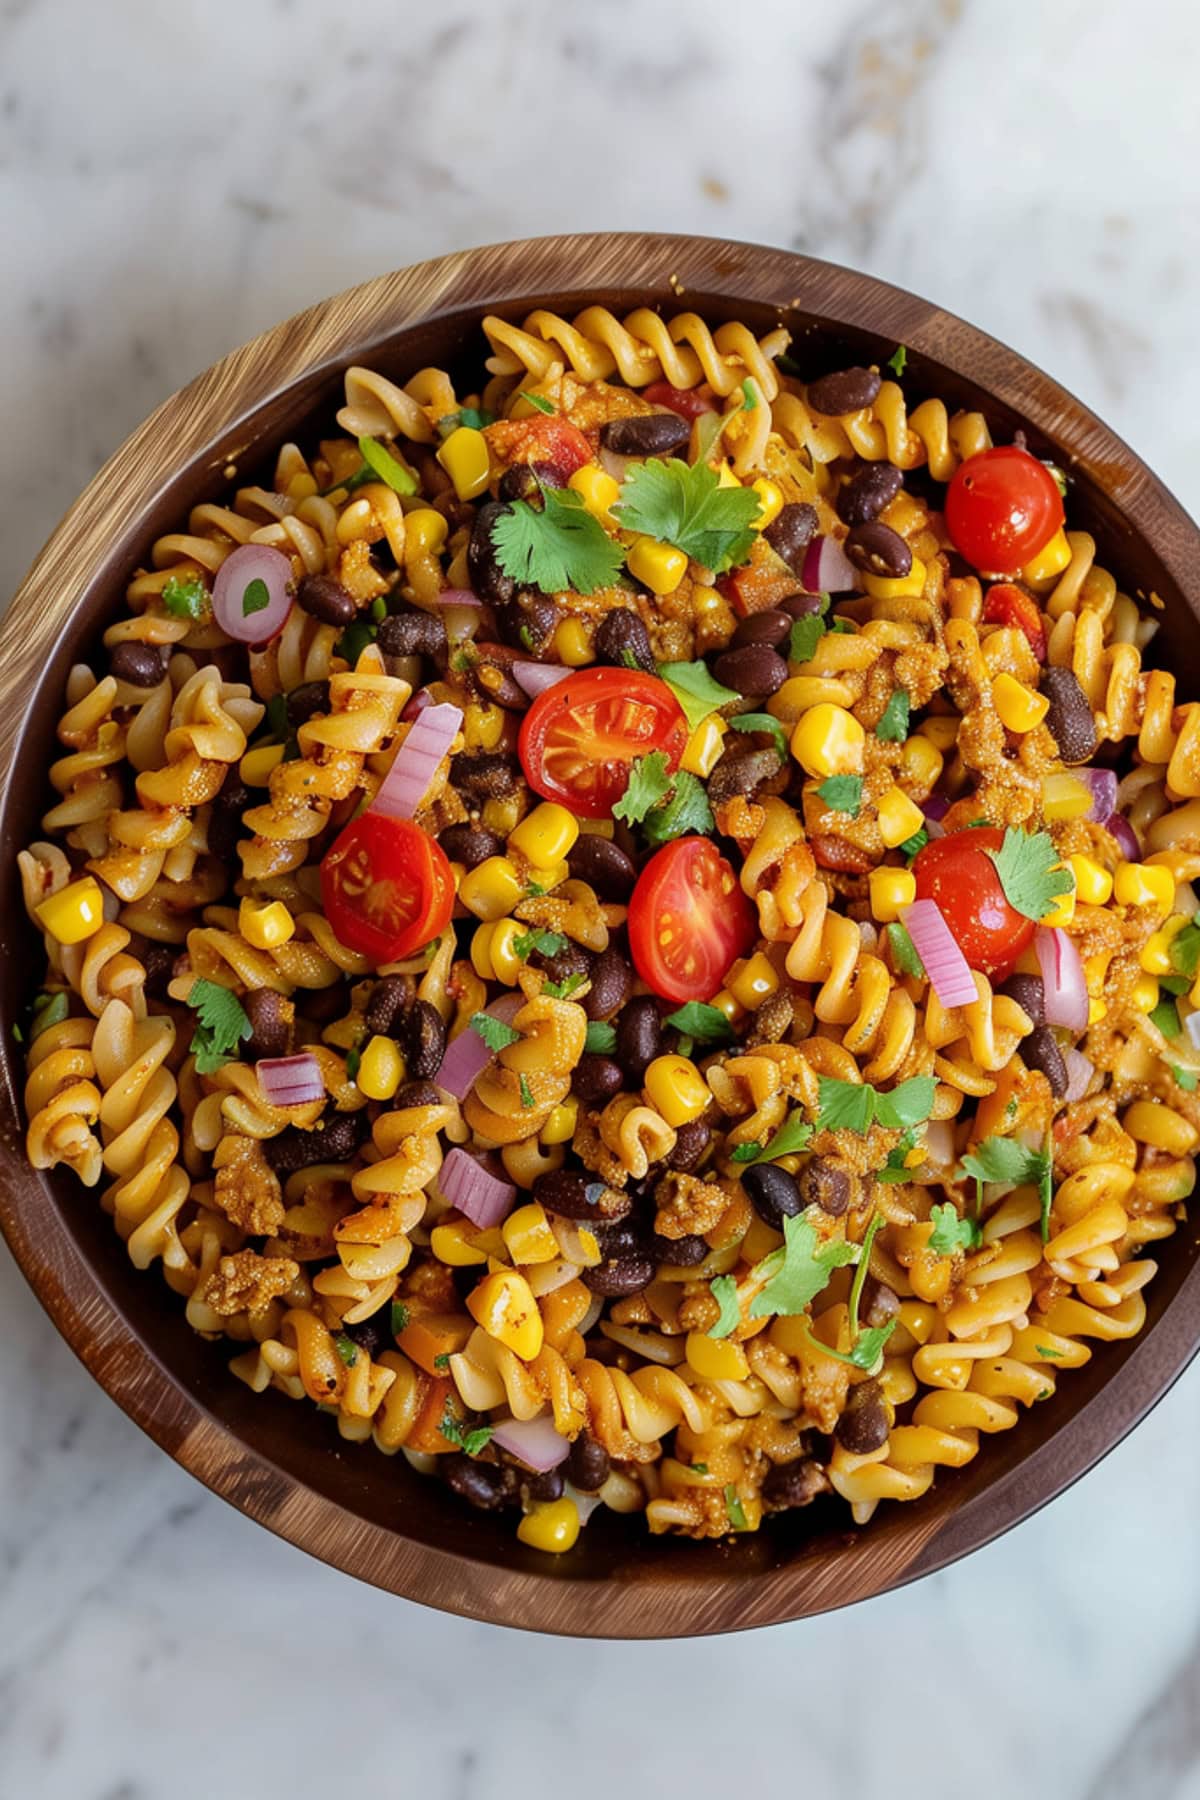 Colorful taco pasta salad, featuring rotini pasta, ground beef, and a medley of vegetables.